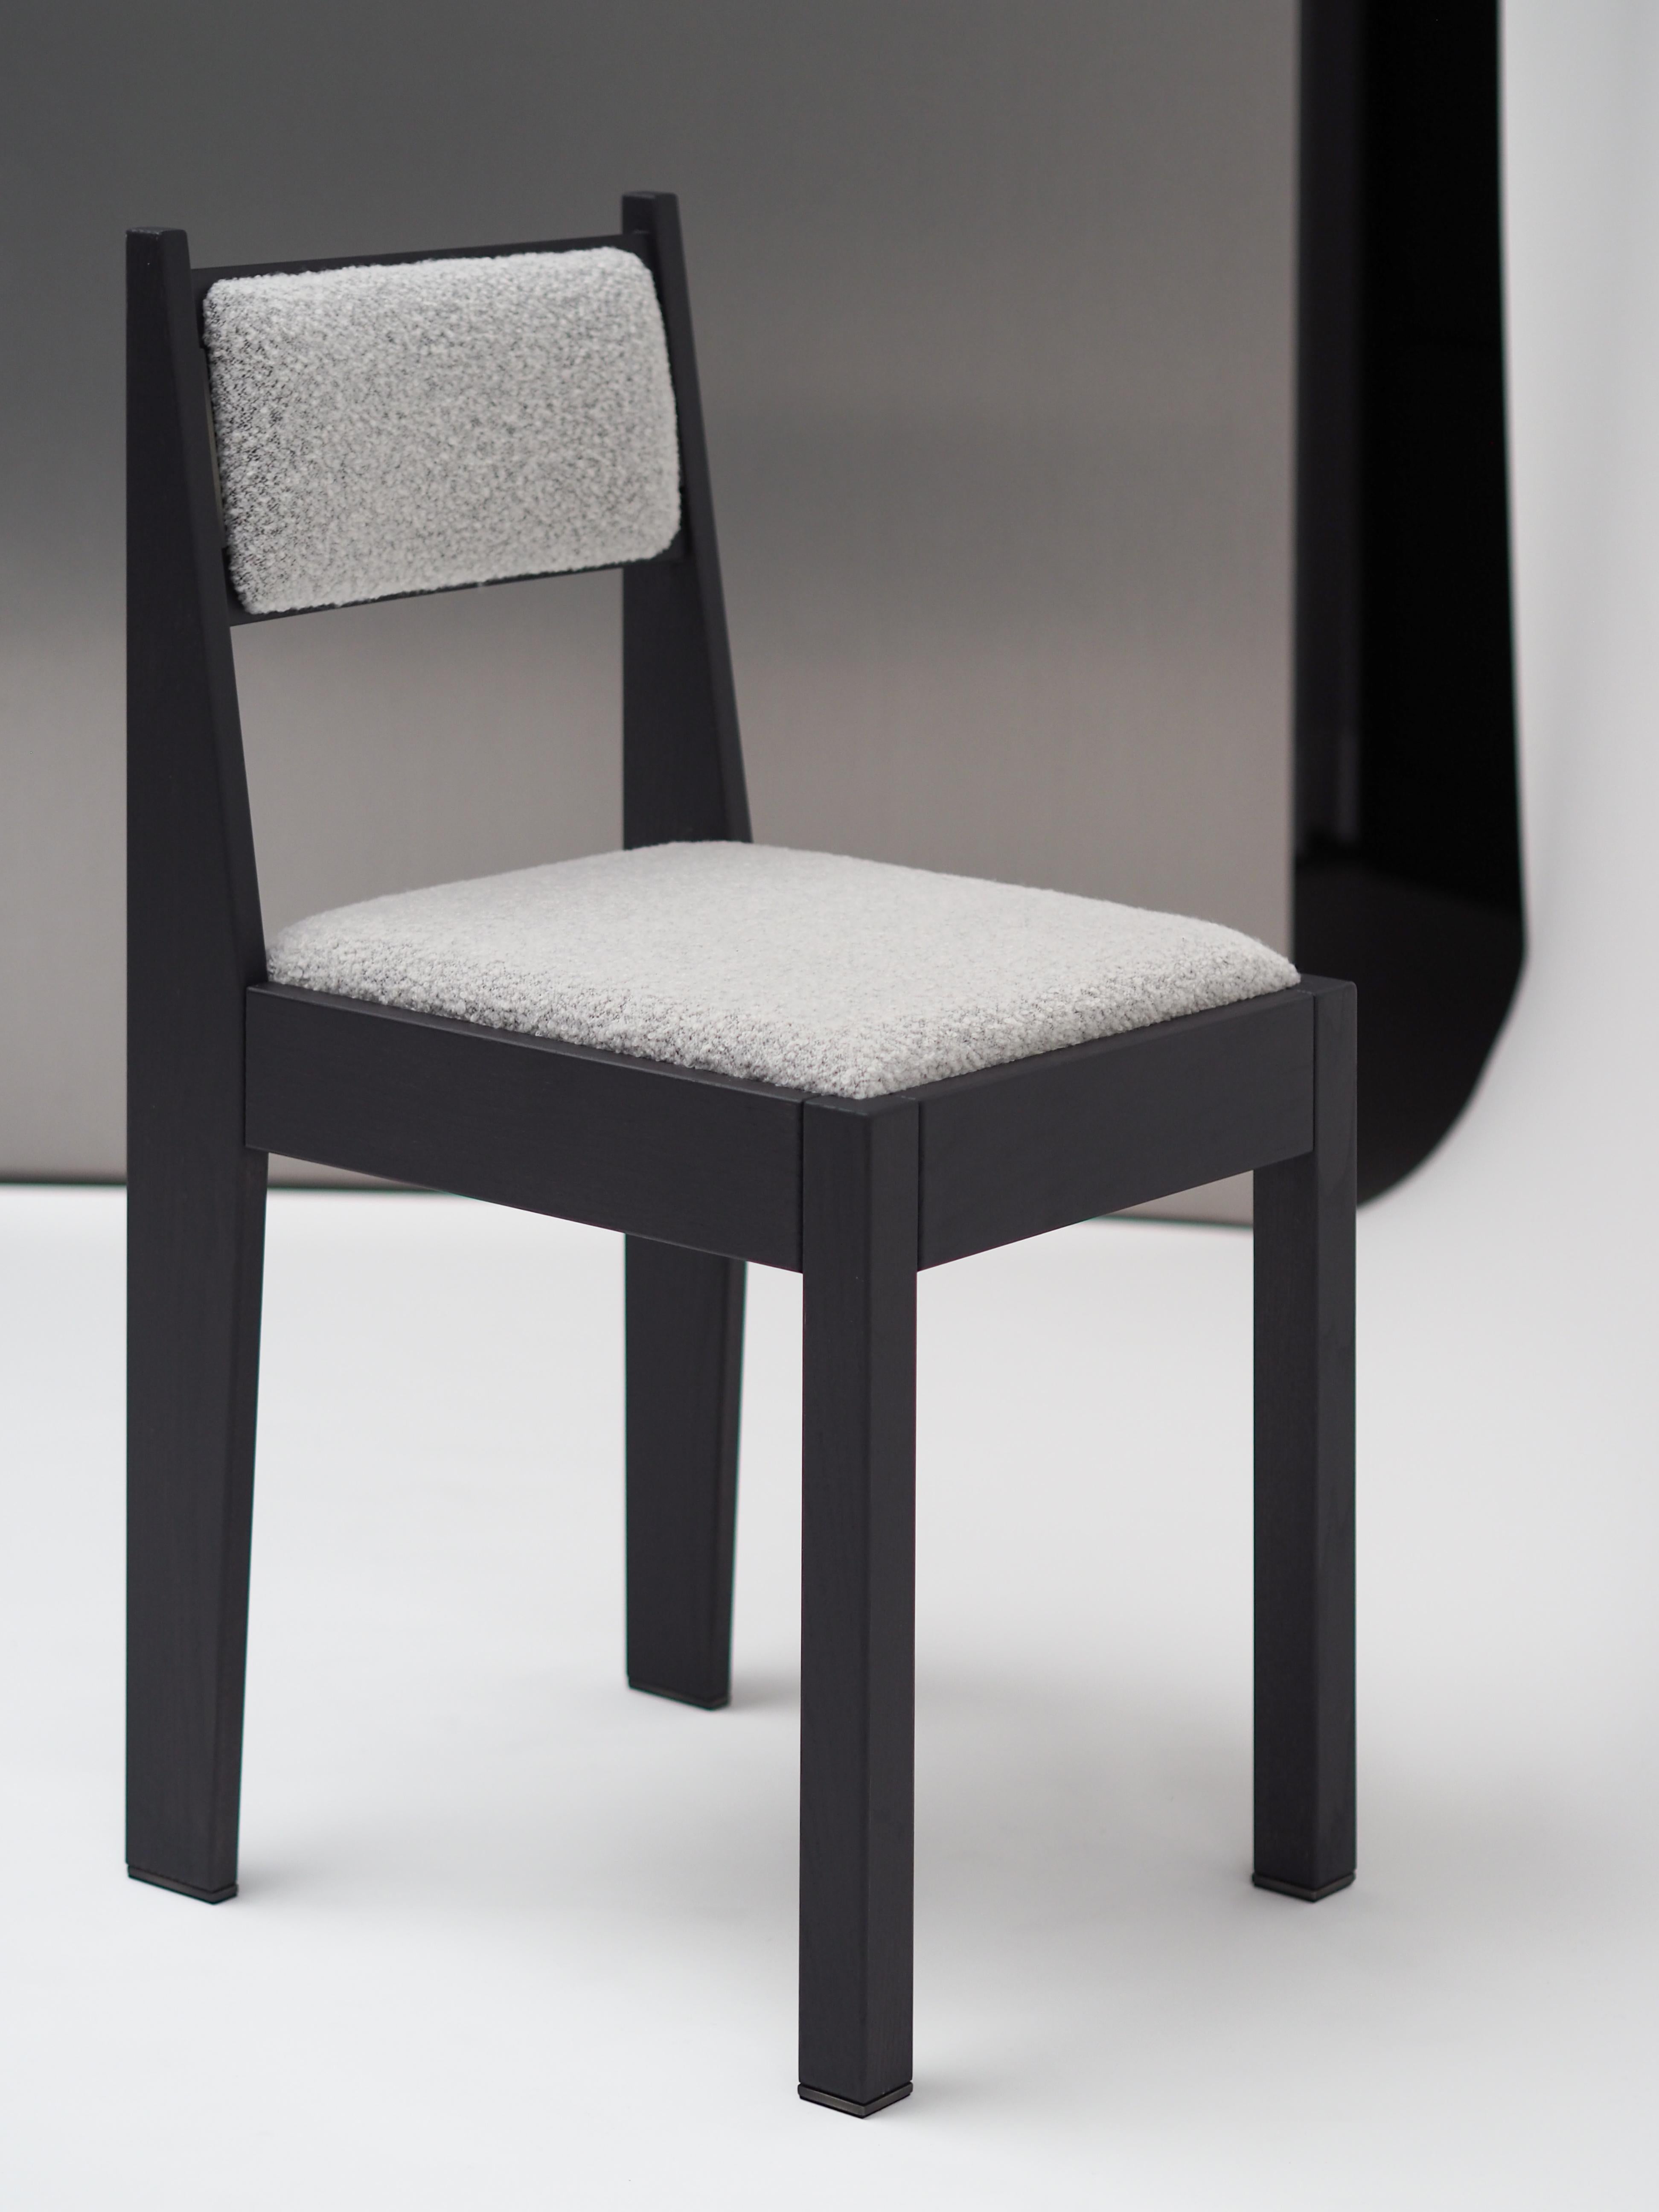 Our barh chair 01 is a classic contemporary design with the finest details. Inspired by the Art Deco movement, the chair looks familiar, making it timeless and fitting for almost every interior. To complete the full barh picture, sophisticated